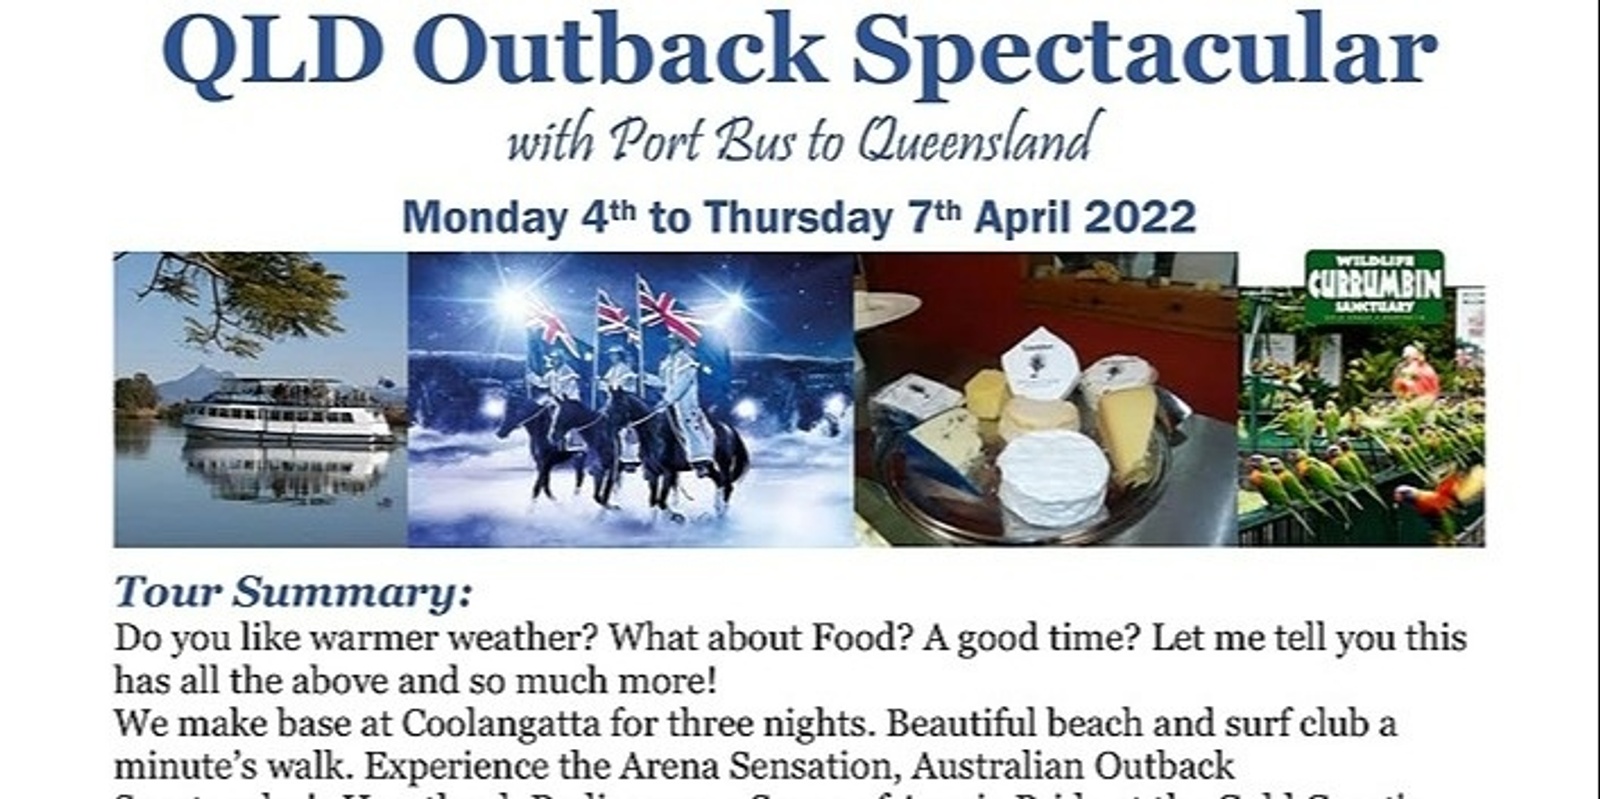 QLD Outback Spectacular